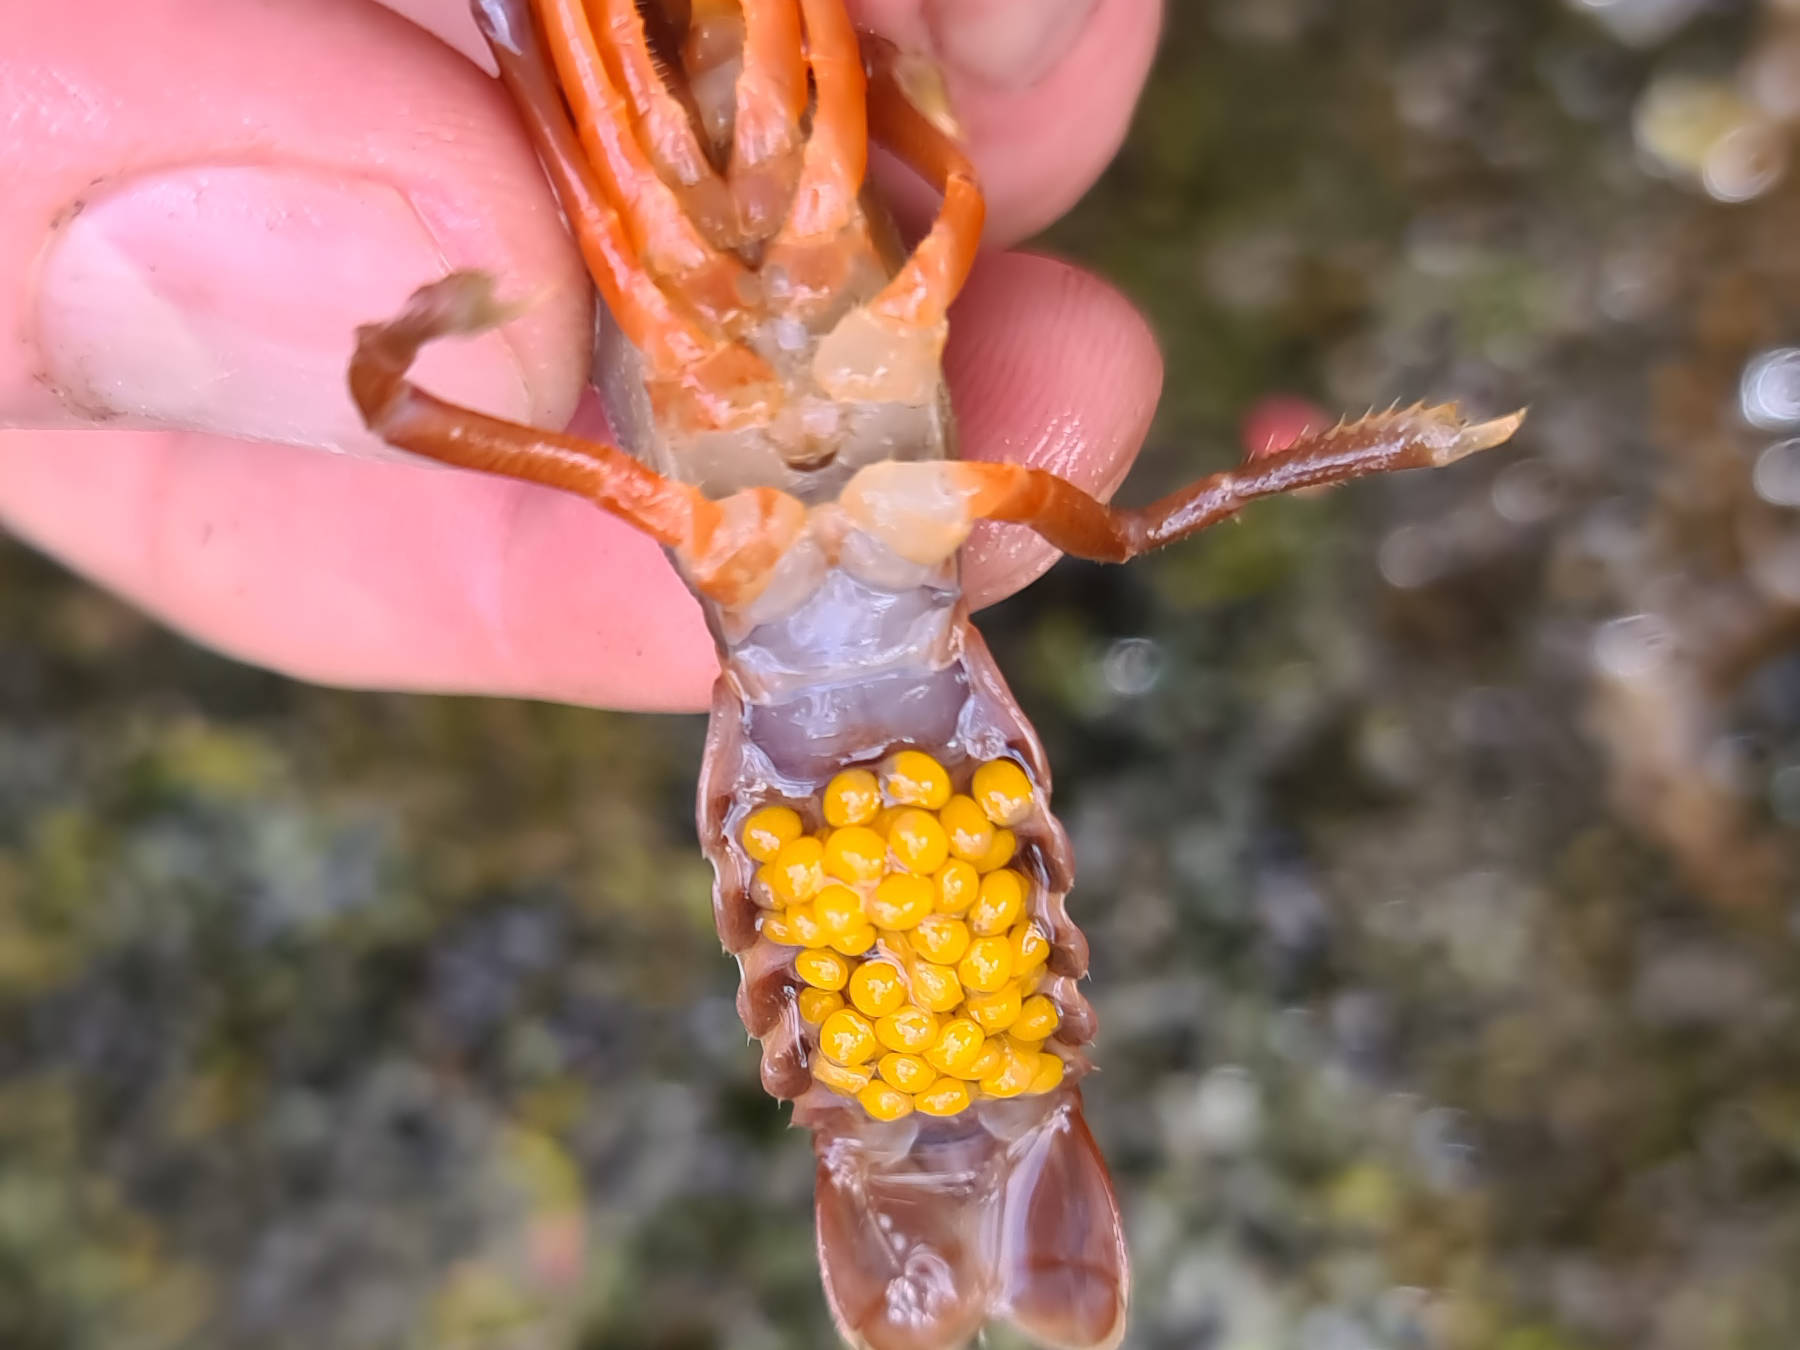 A Tasmanian burrowing crayfish. It is being held upside down. The photo shows the fingers of the person holding it. The crayfish is about as big as a large adult finger. The underside of the tail is full of bright yellow eggs.